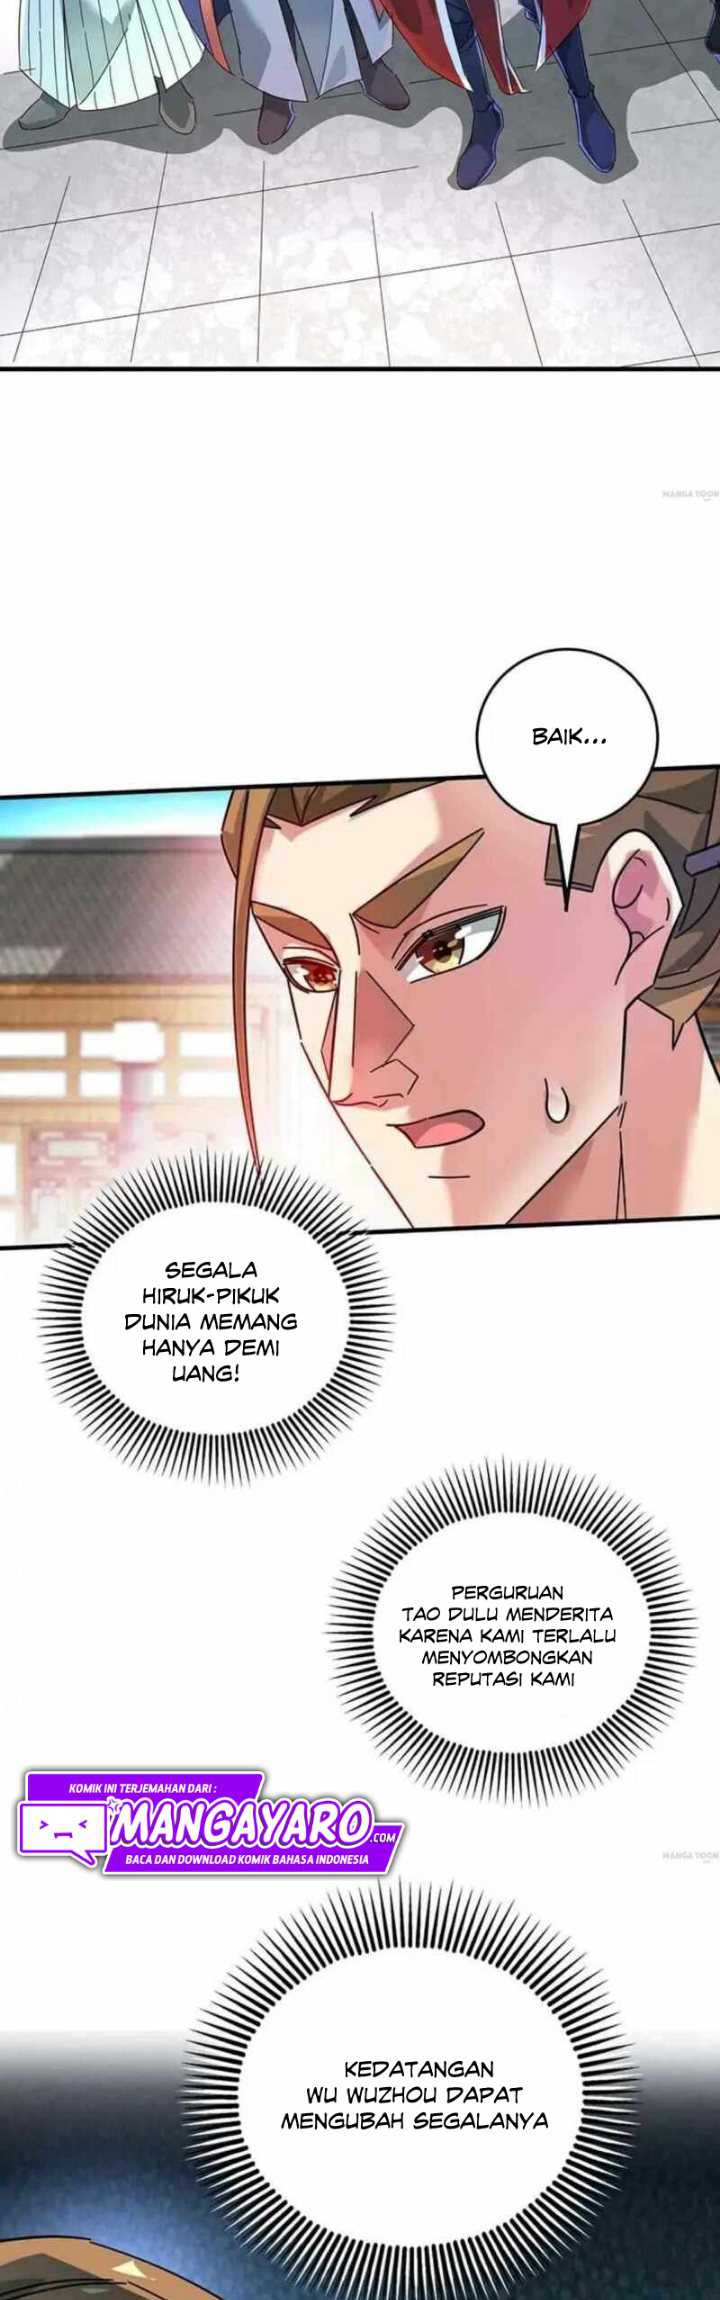 The First Son-In-Law Vanguard of All Time Chapter 198